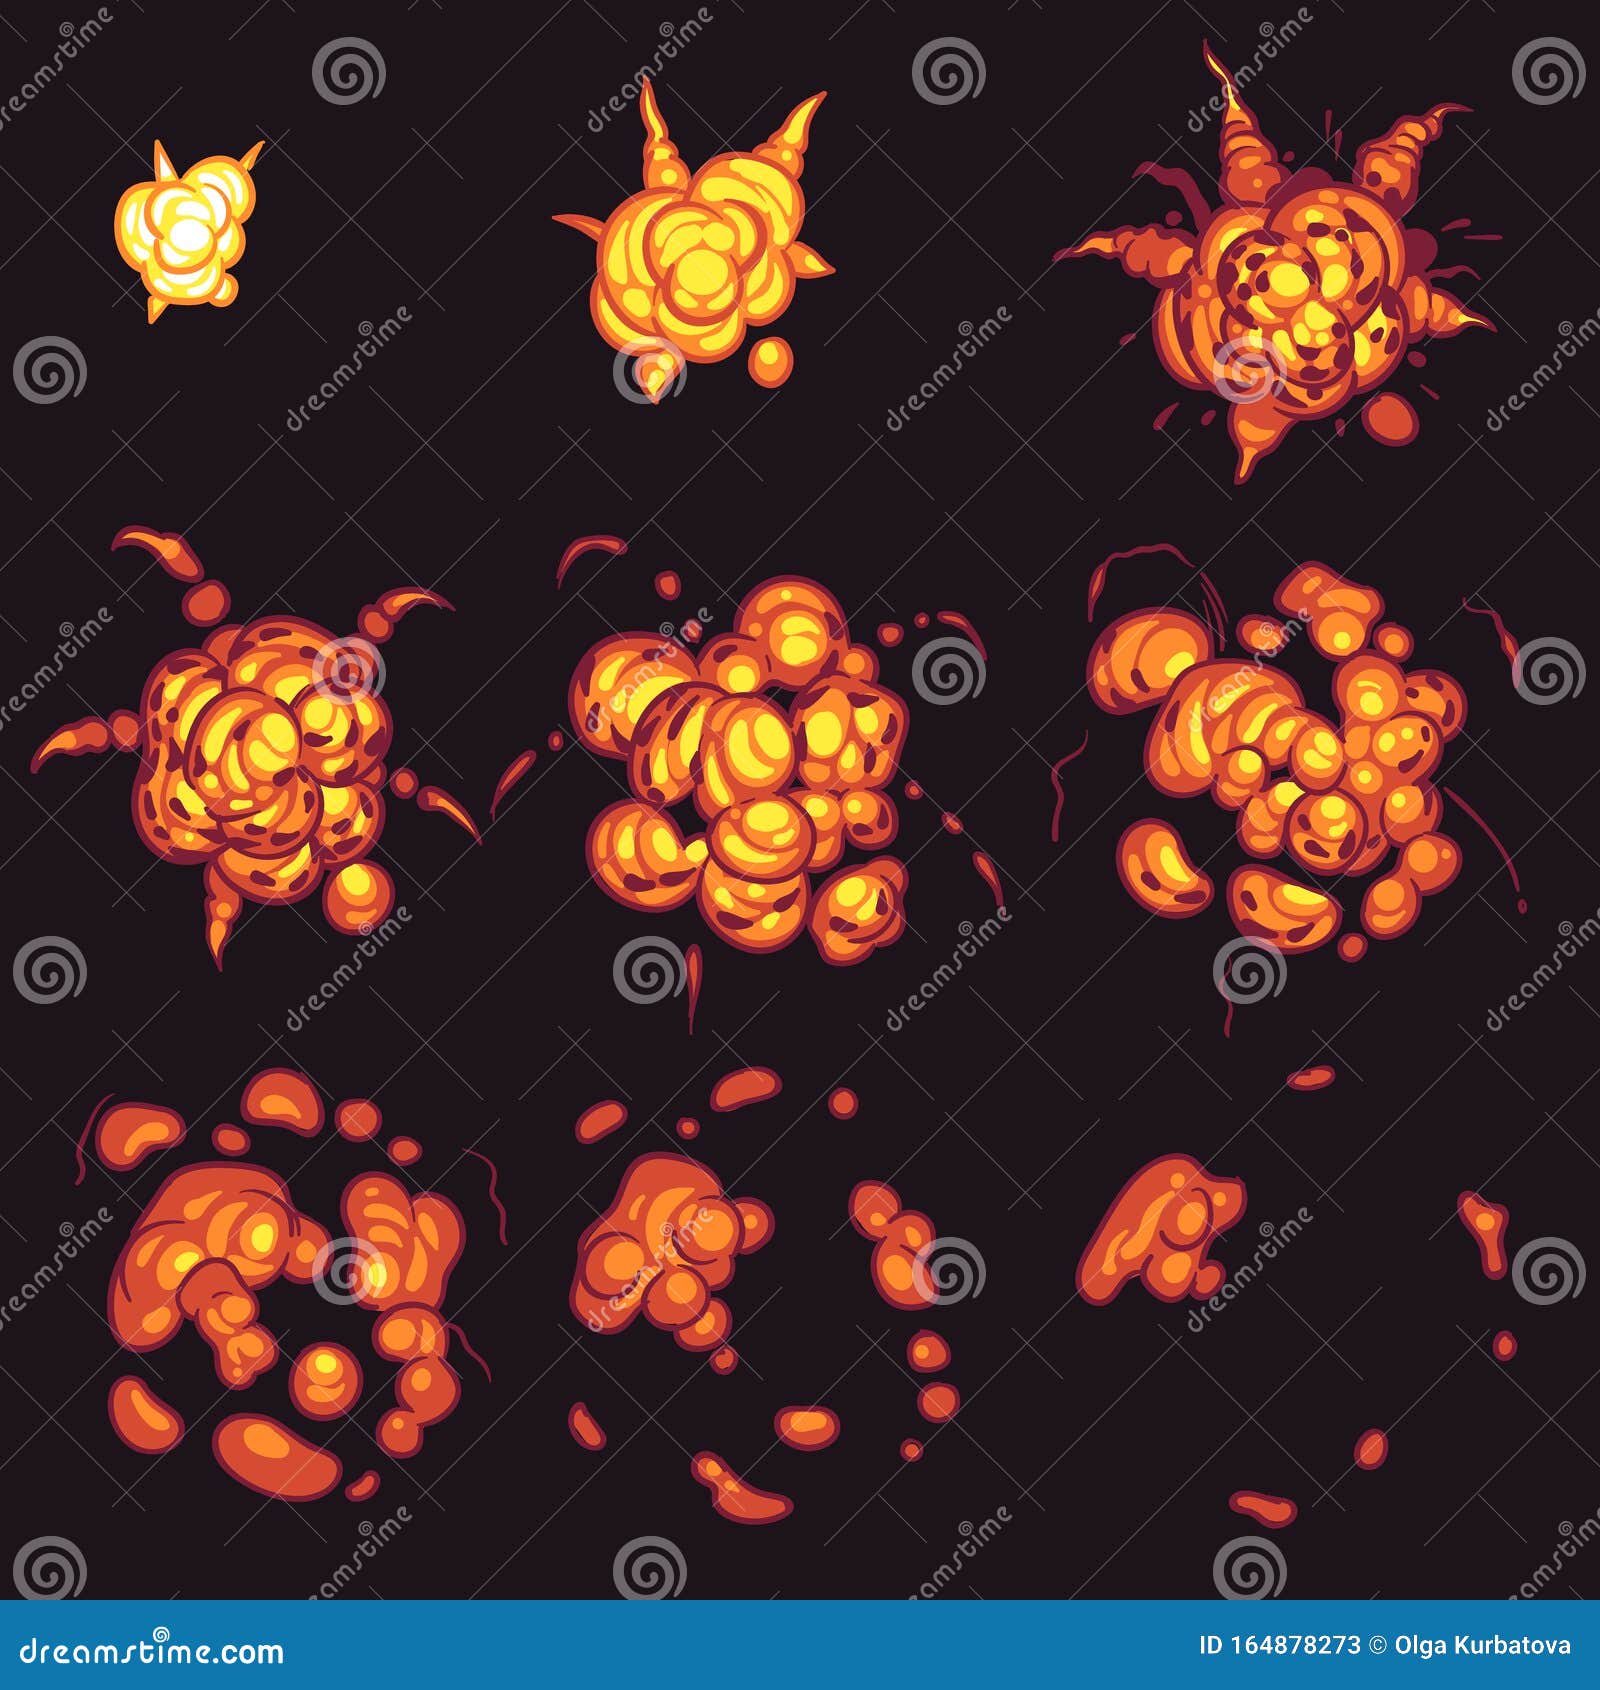 explosion animation. cartoon bang bomb flame frames, flash fire with smoke effect storyboard comics gaming bombing